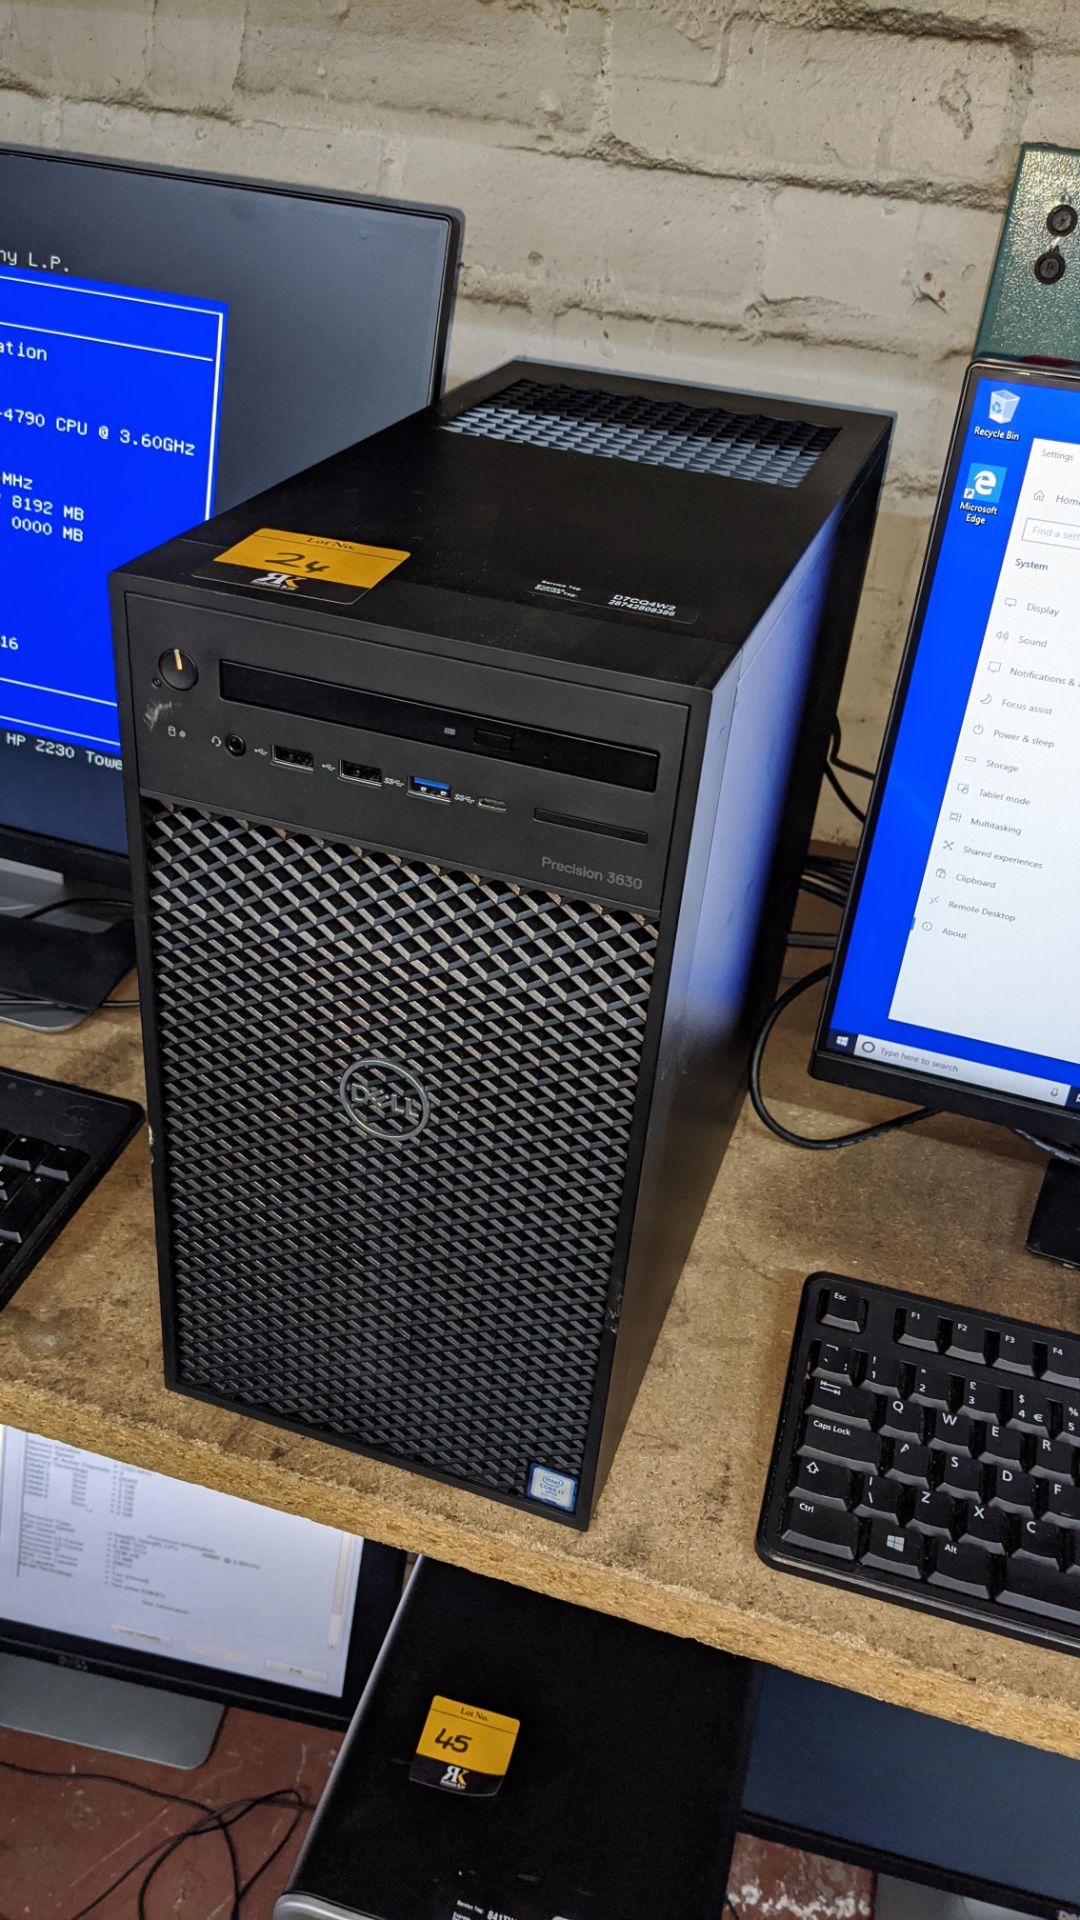 Dell Precision 3630 tower computer with Intel Core i7-8700 processor, 8Gb RAM, 256Gb SSD etc. includ - Image 3 of 5